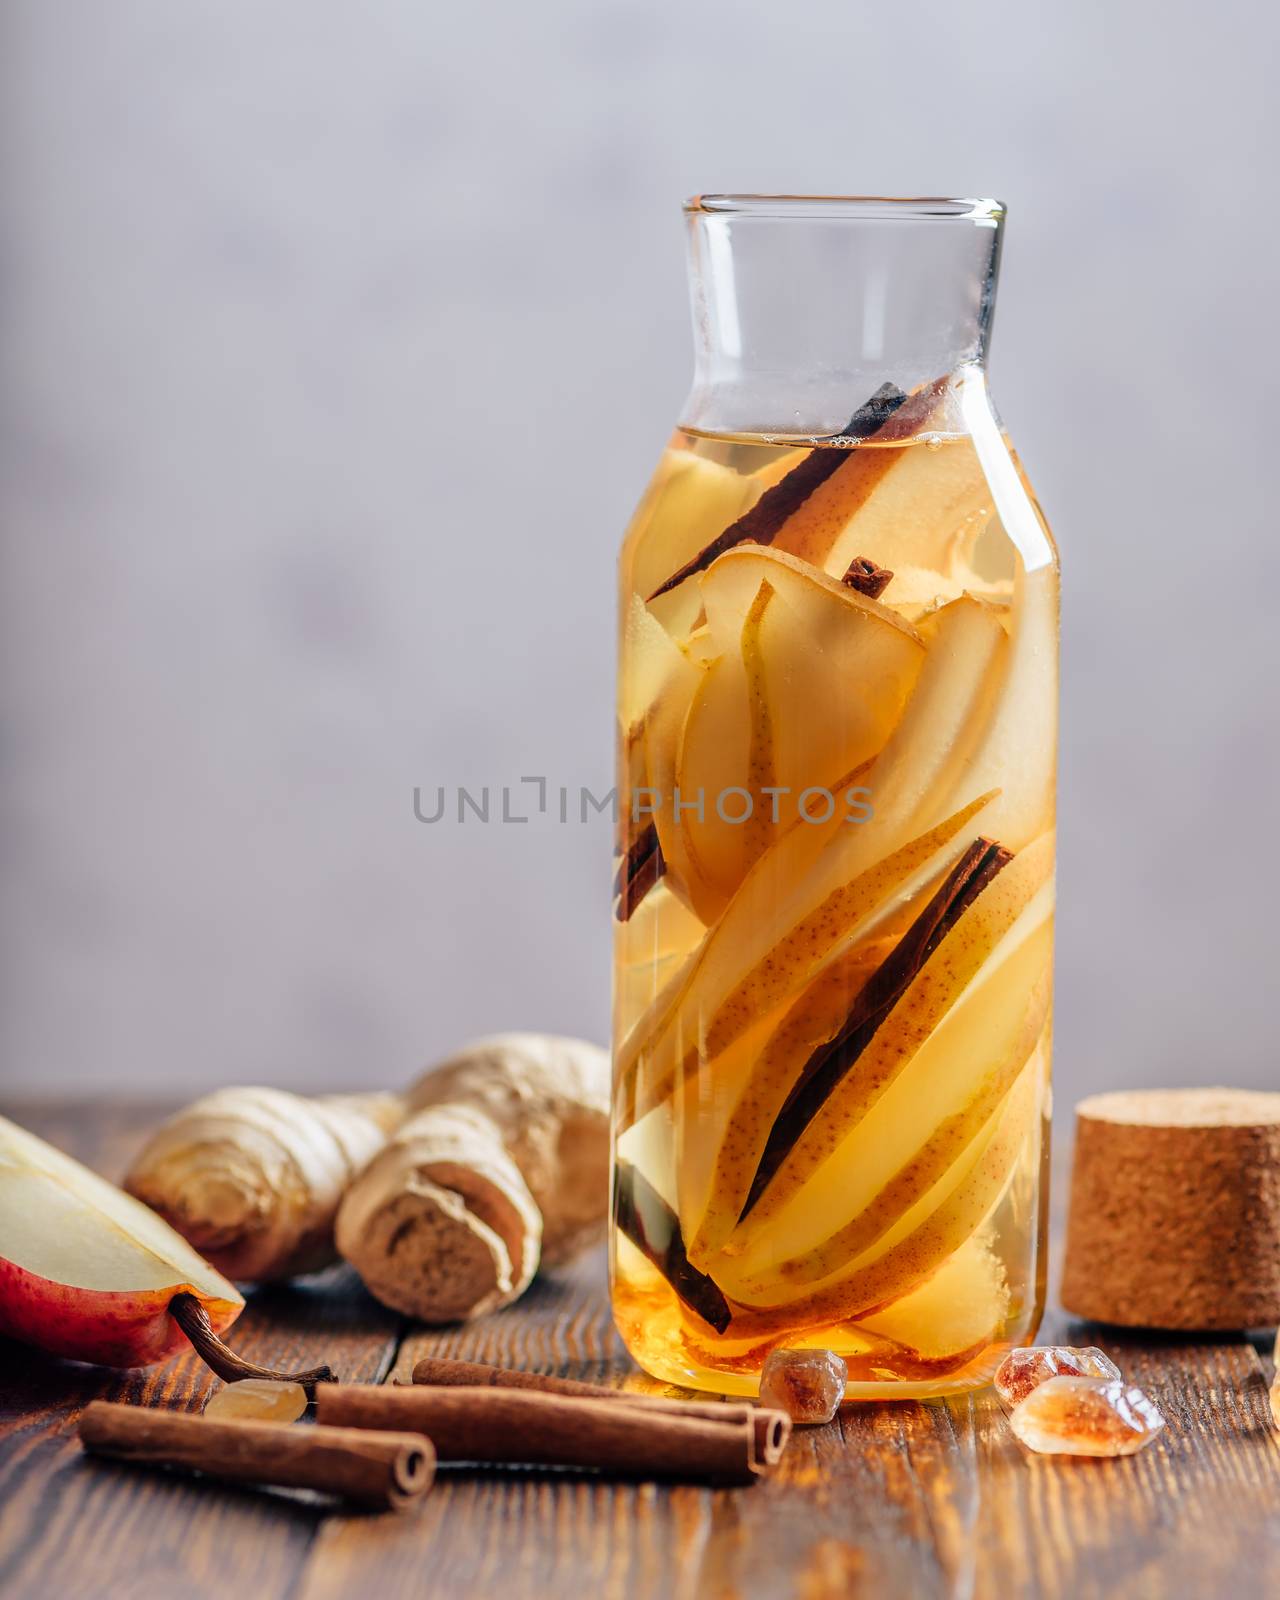 Water infused with Pear, Ginger Root and Cinnamon Stick. Some Ingredients on Table. Vertical Orientation and Copy Space.